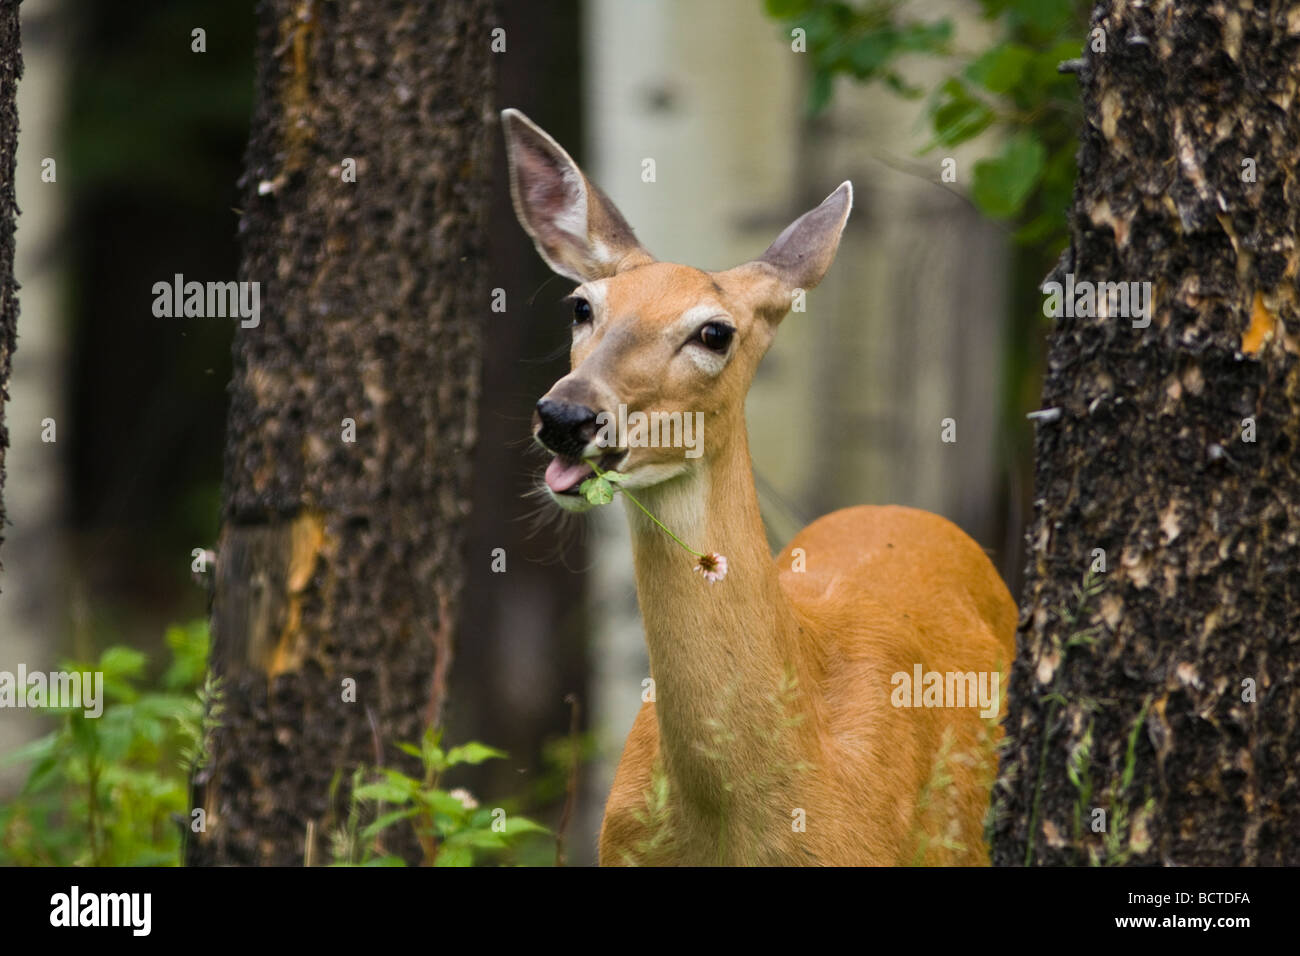 A young whitetail doe deer grazing on a piece of grass in a forest. Stock Photo